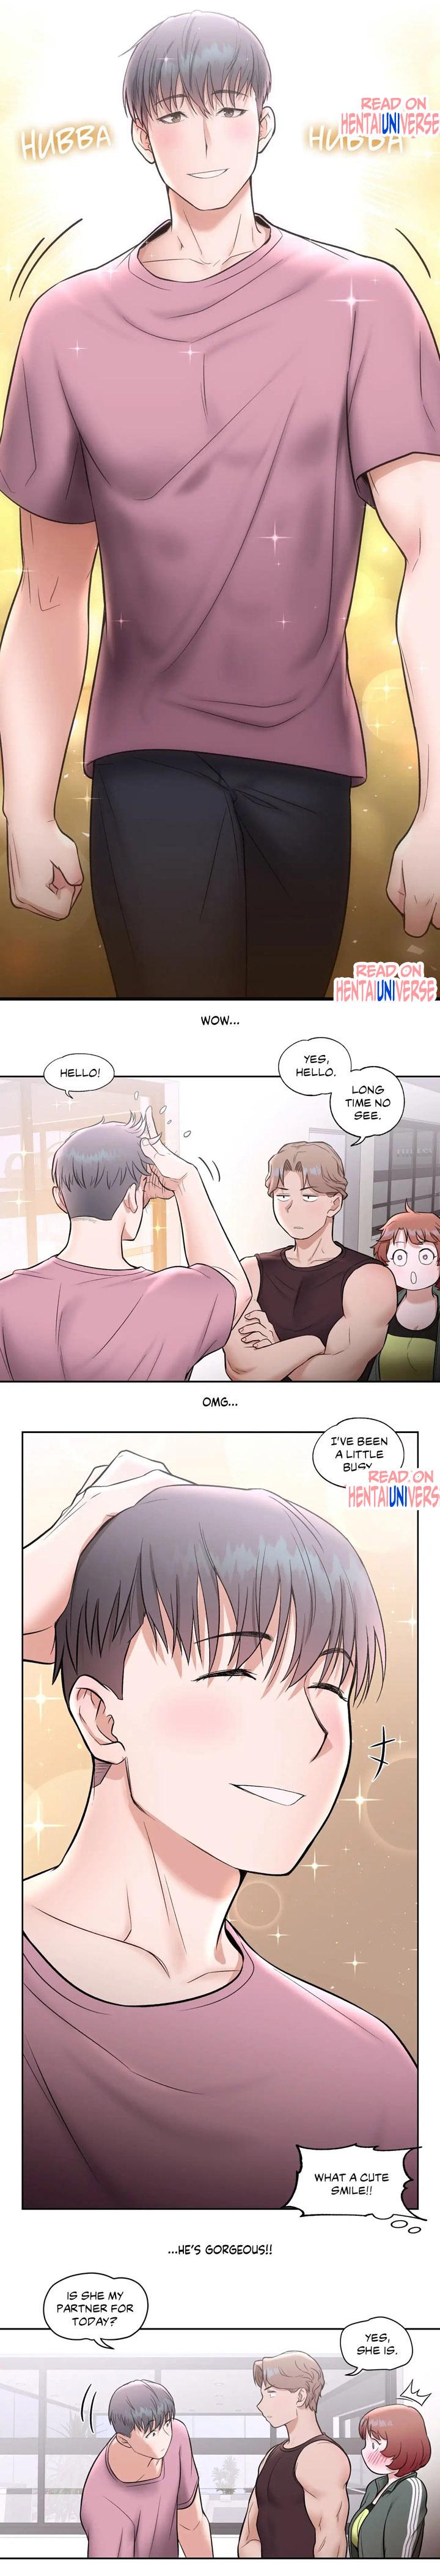 Sexercise Ch.22/? 329